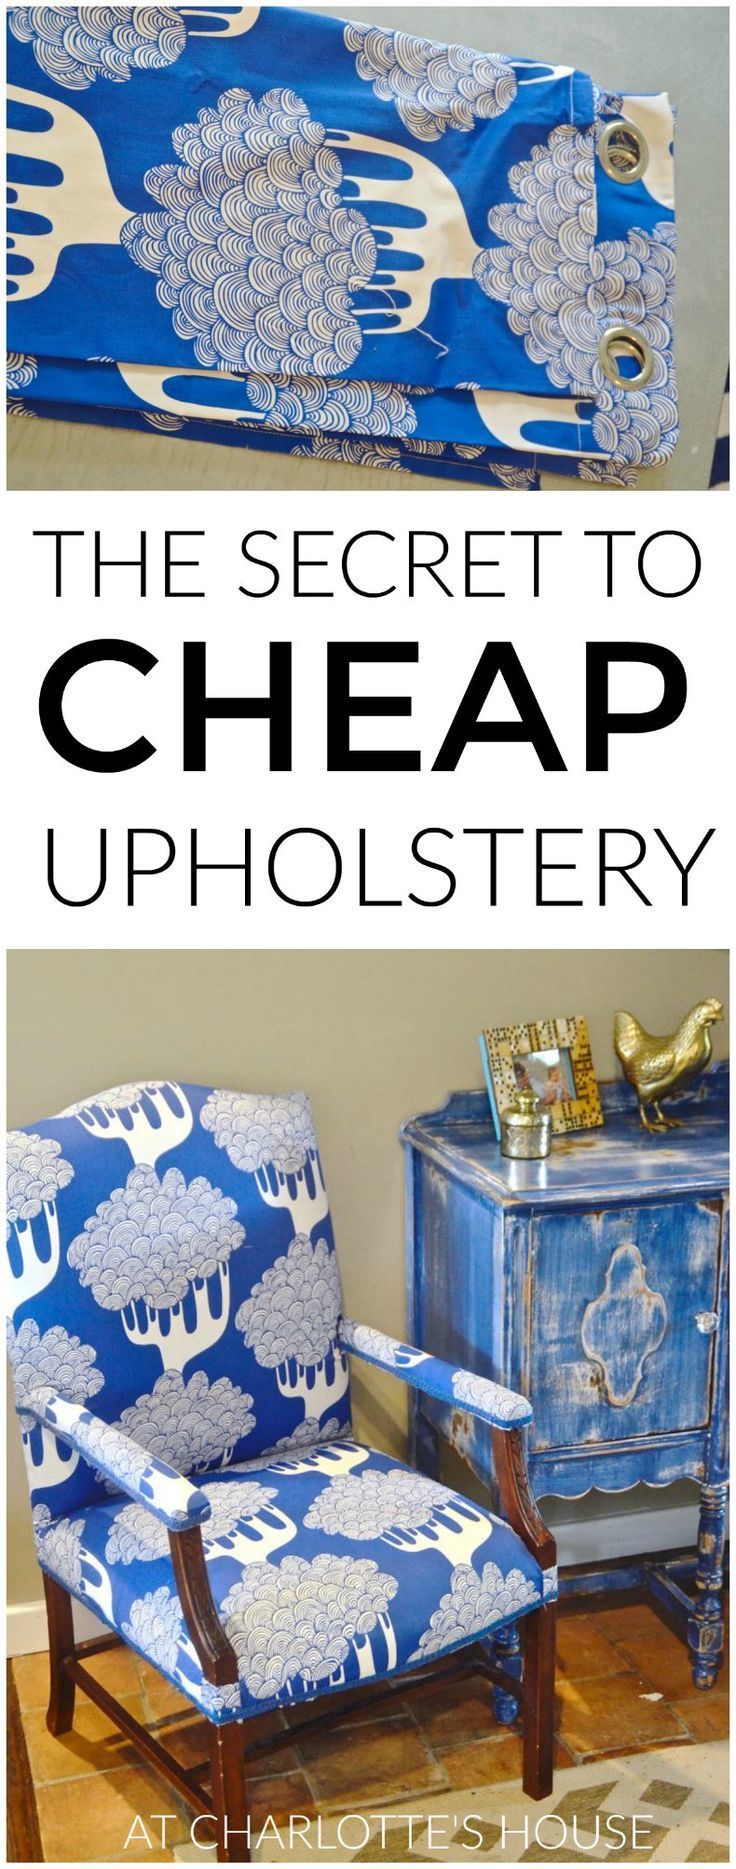 Cheap Upholstery Tip -   diy Furniture upholstery